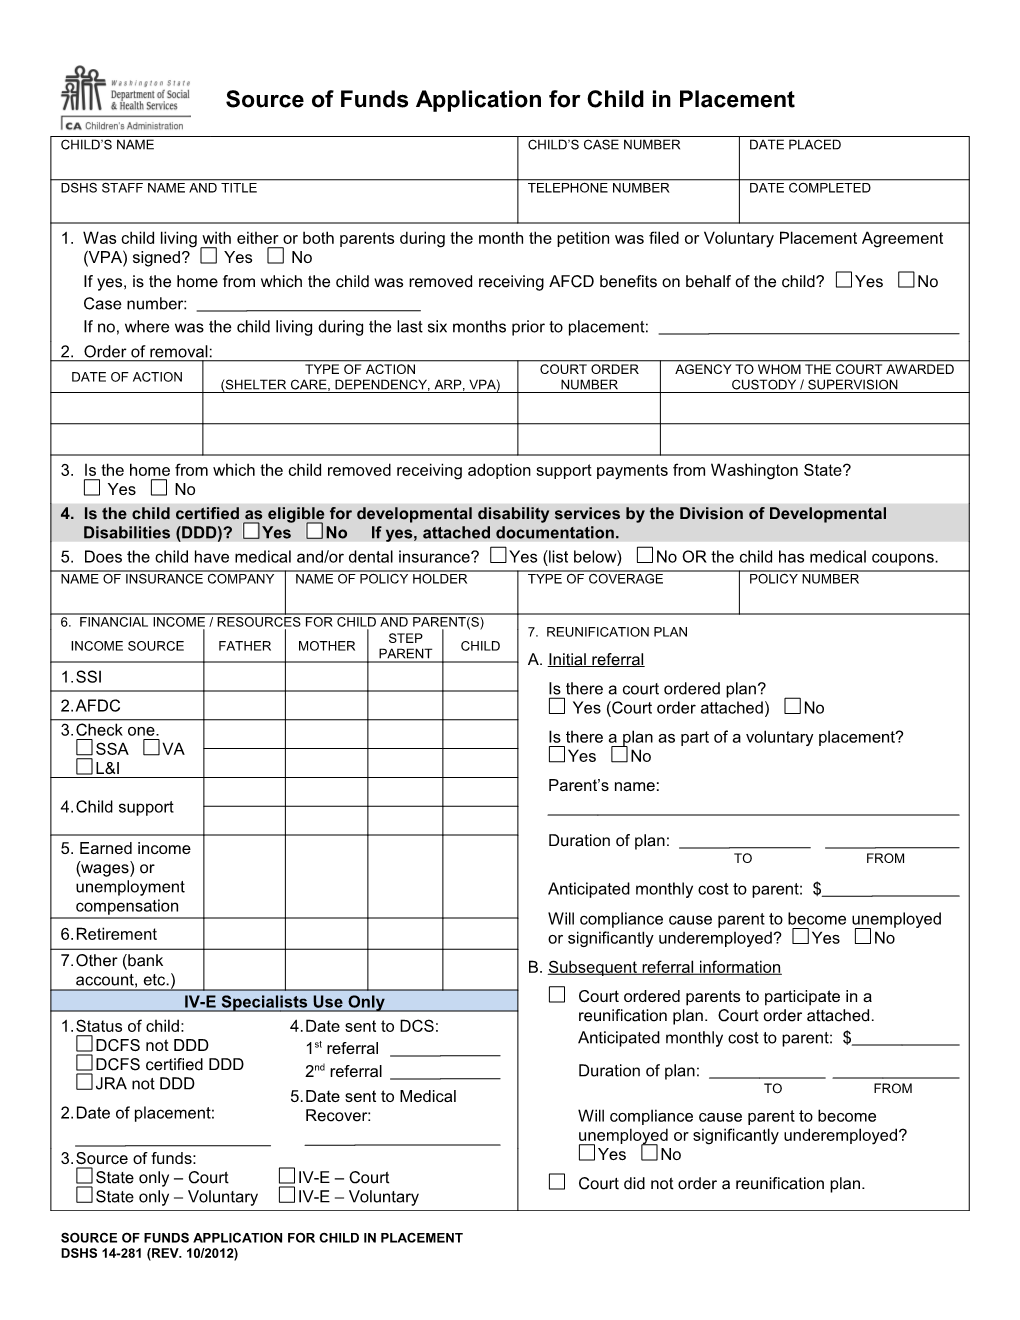 Source of Funds Application for Child in Placement